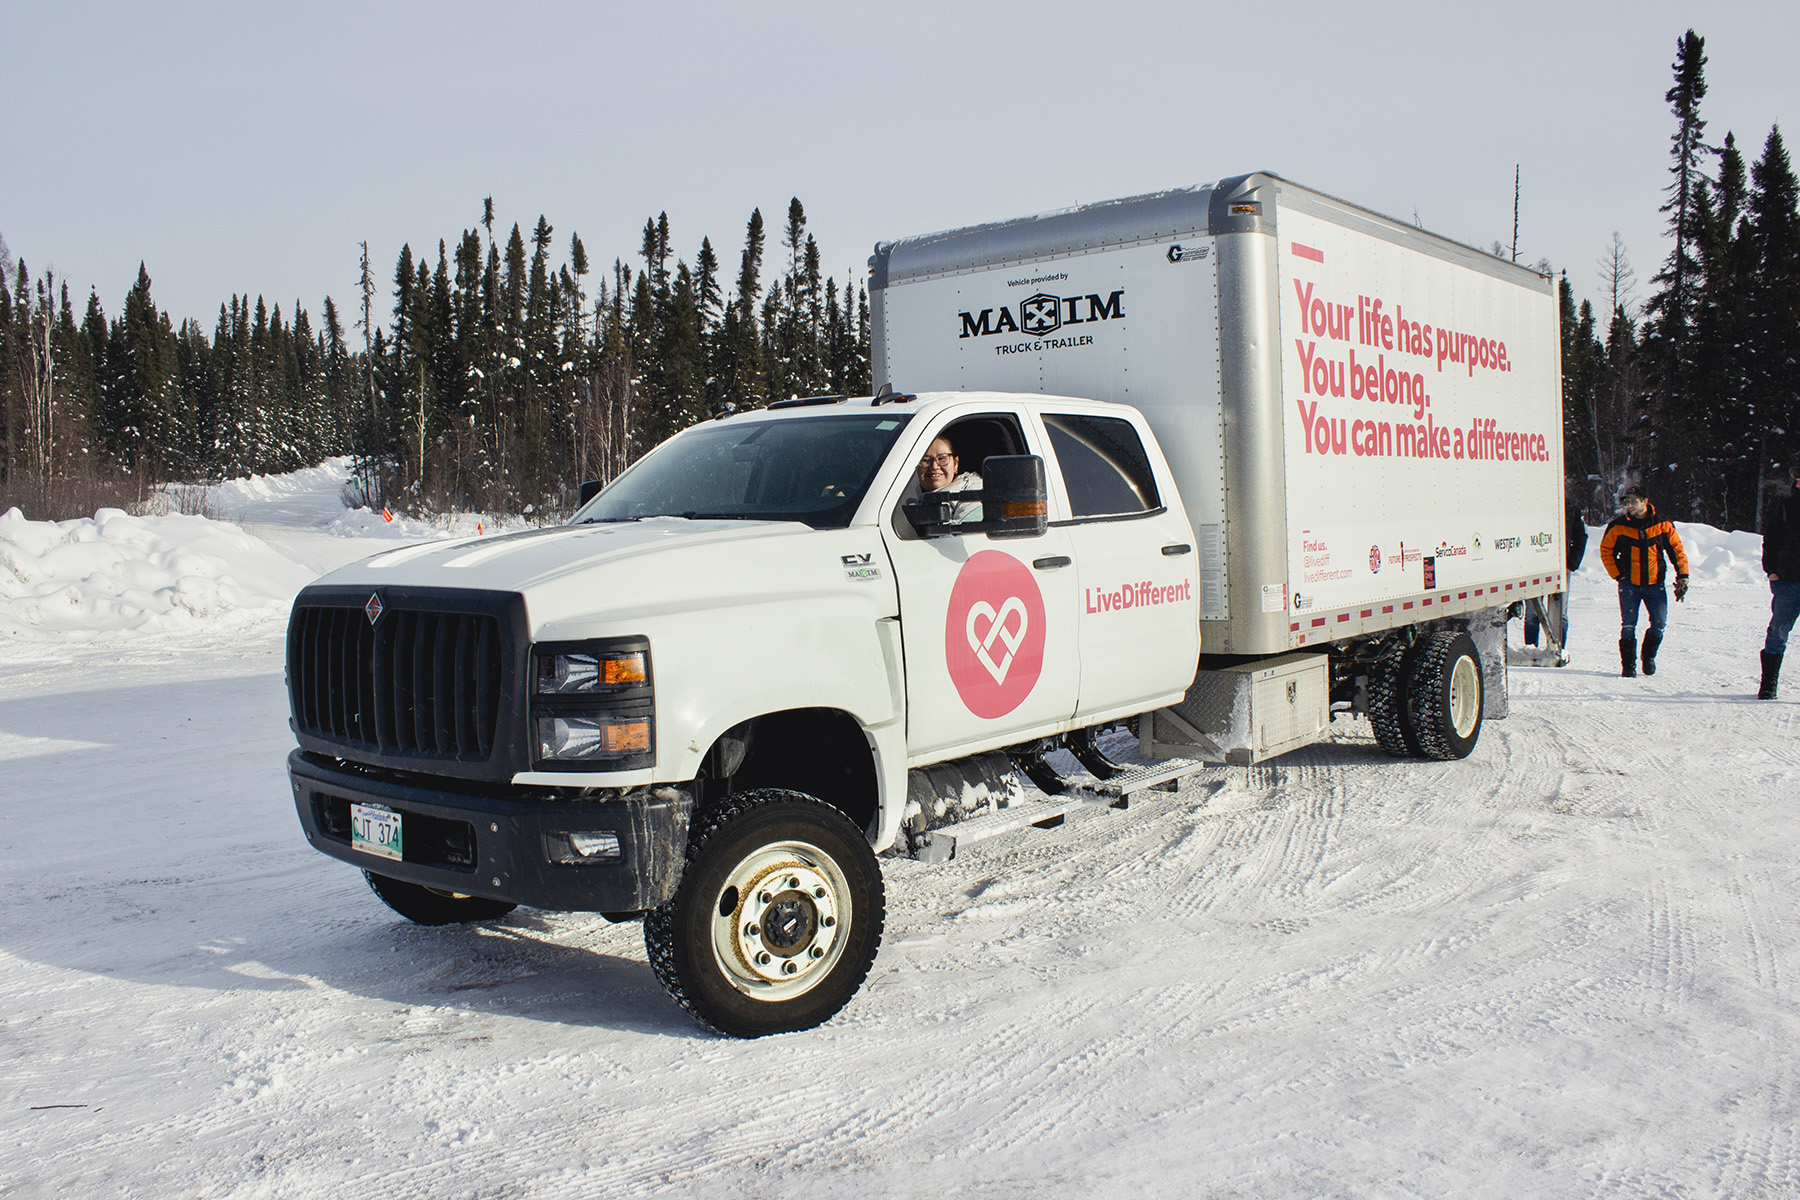 Ice Road Tour: Supporting youth in Northern Manitoba